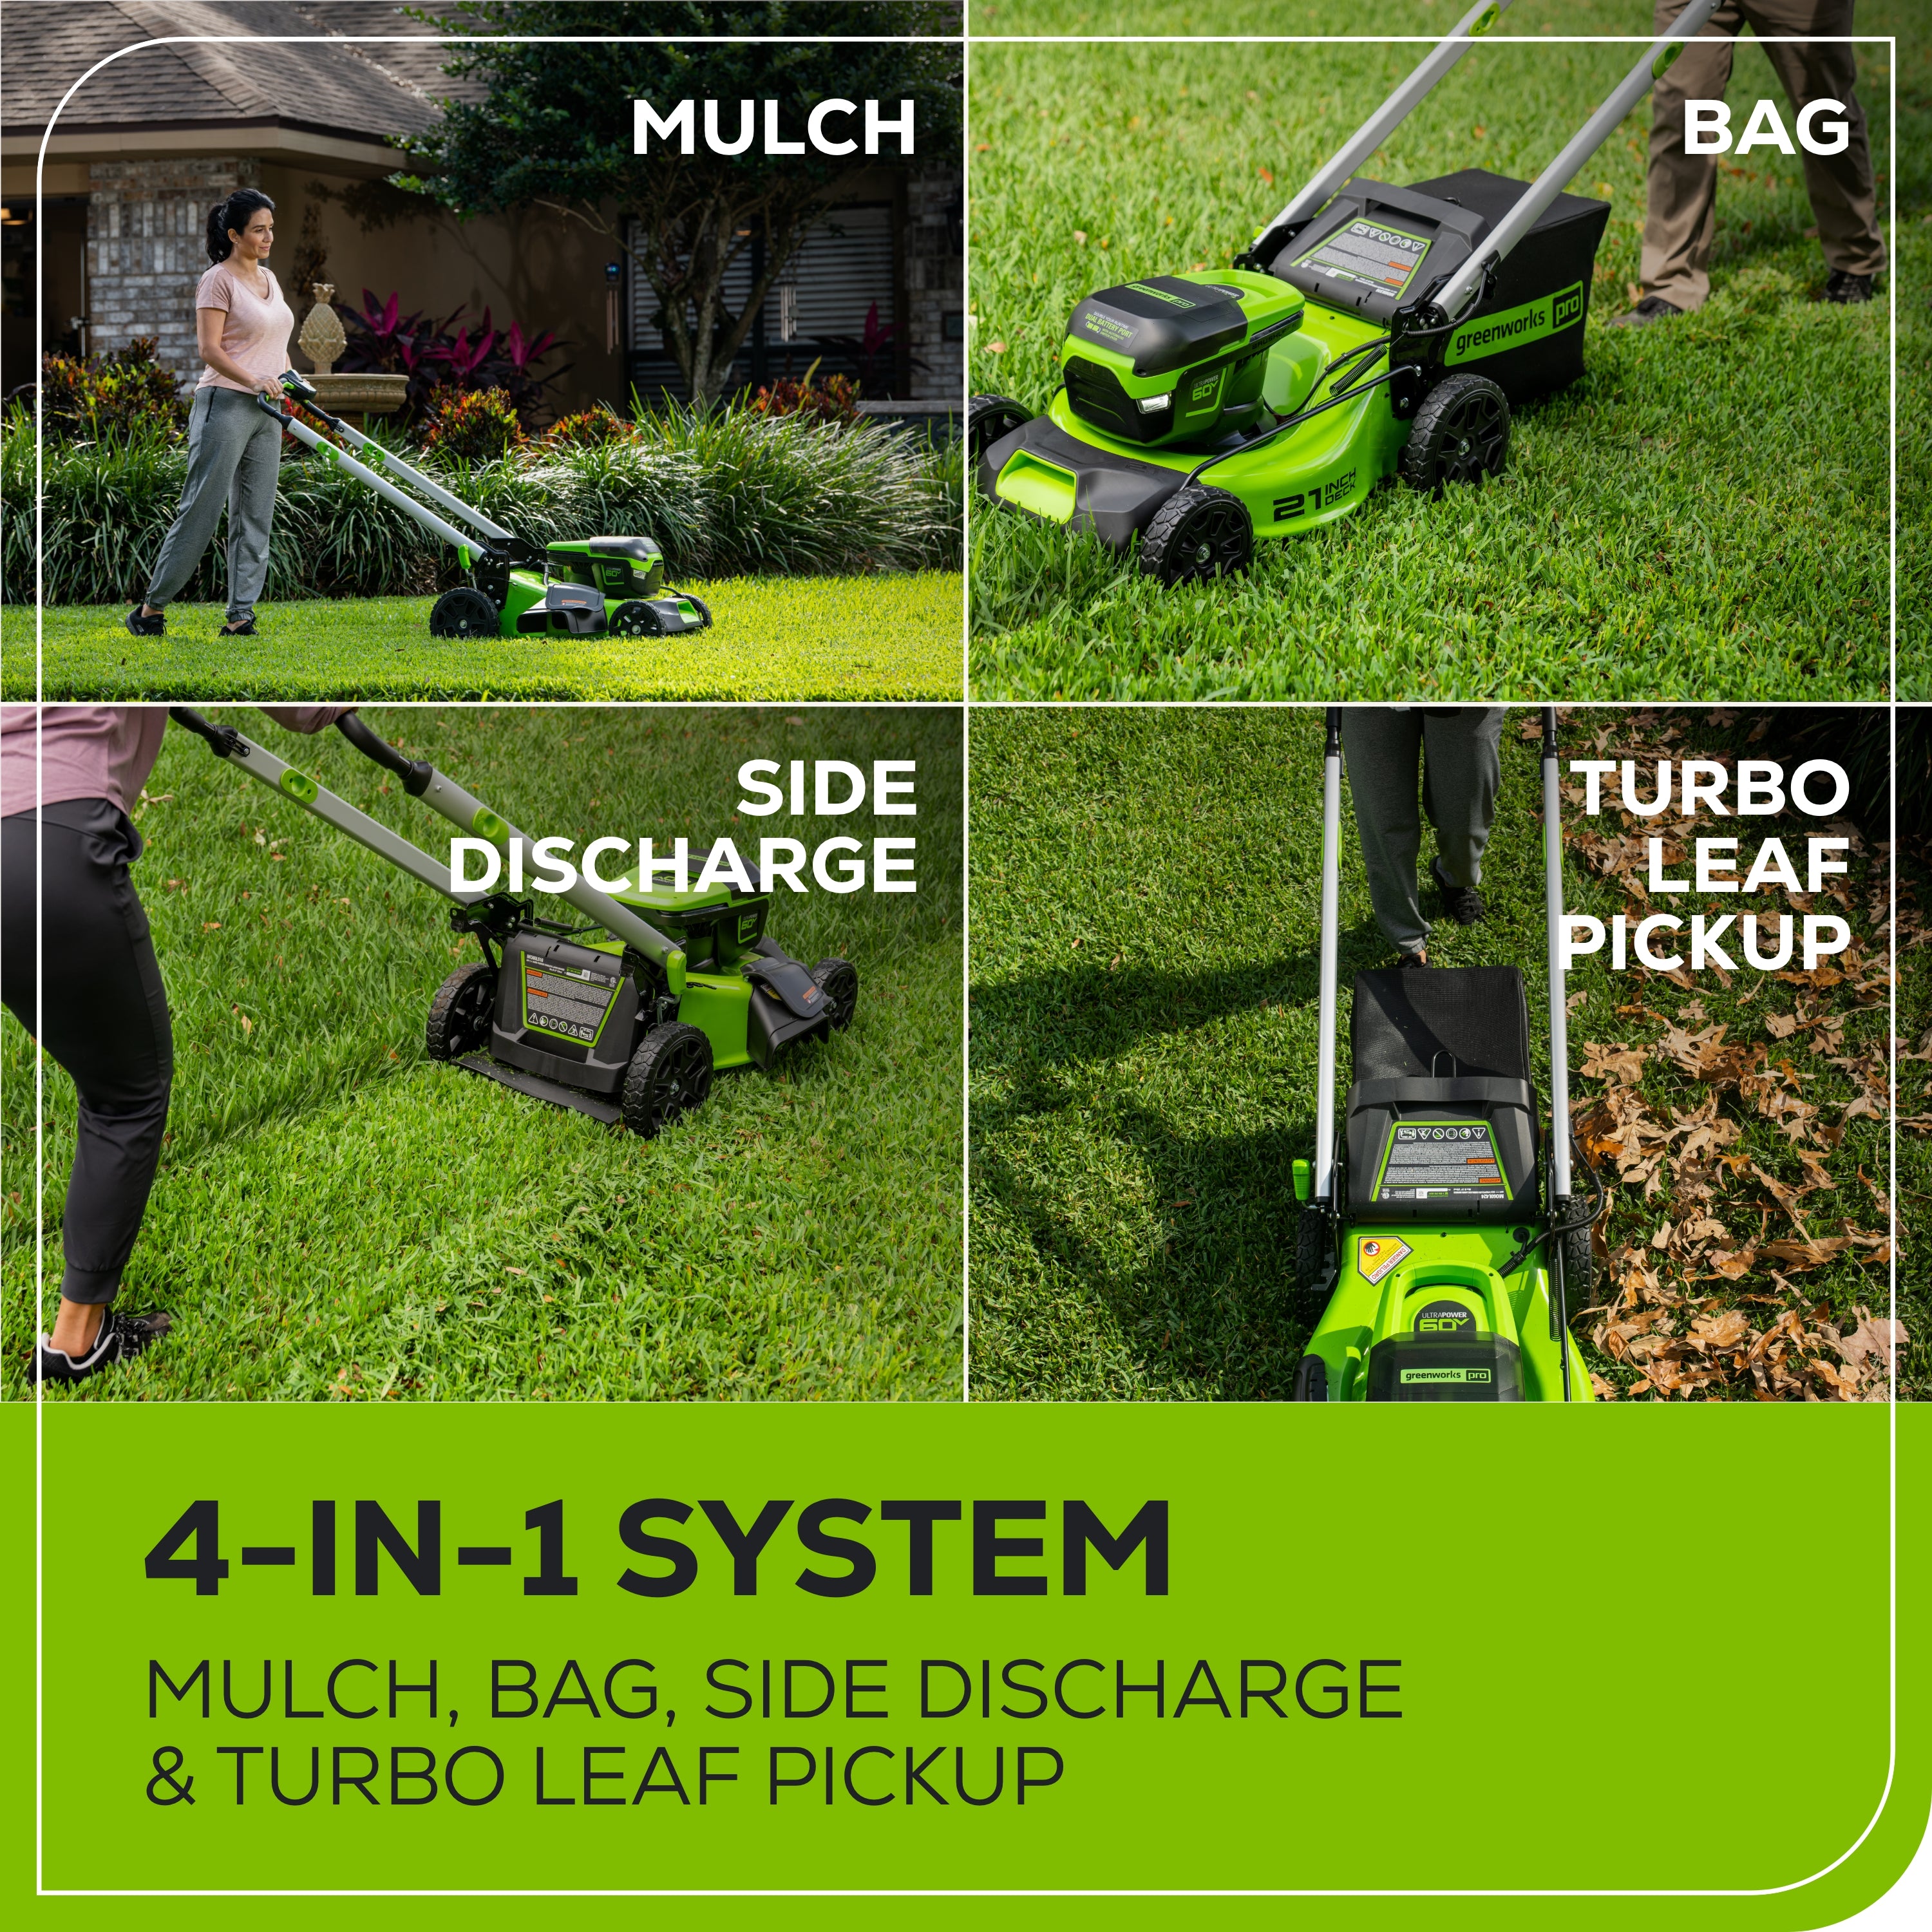 60V 21" Cordless Battery Push Lawn Mower w/ 5.0Ah Battery & Charger